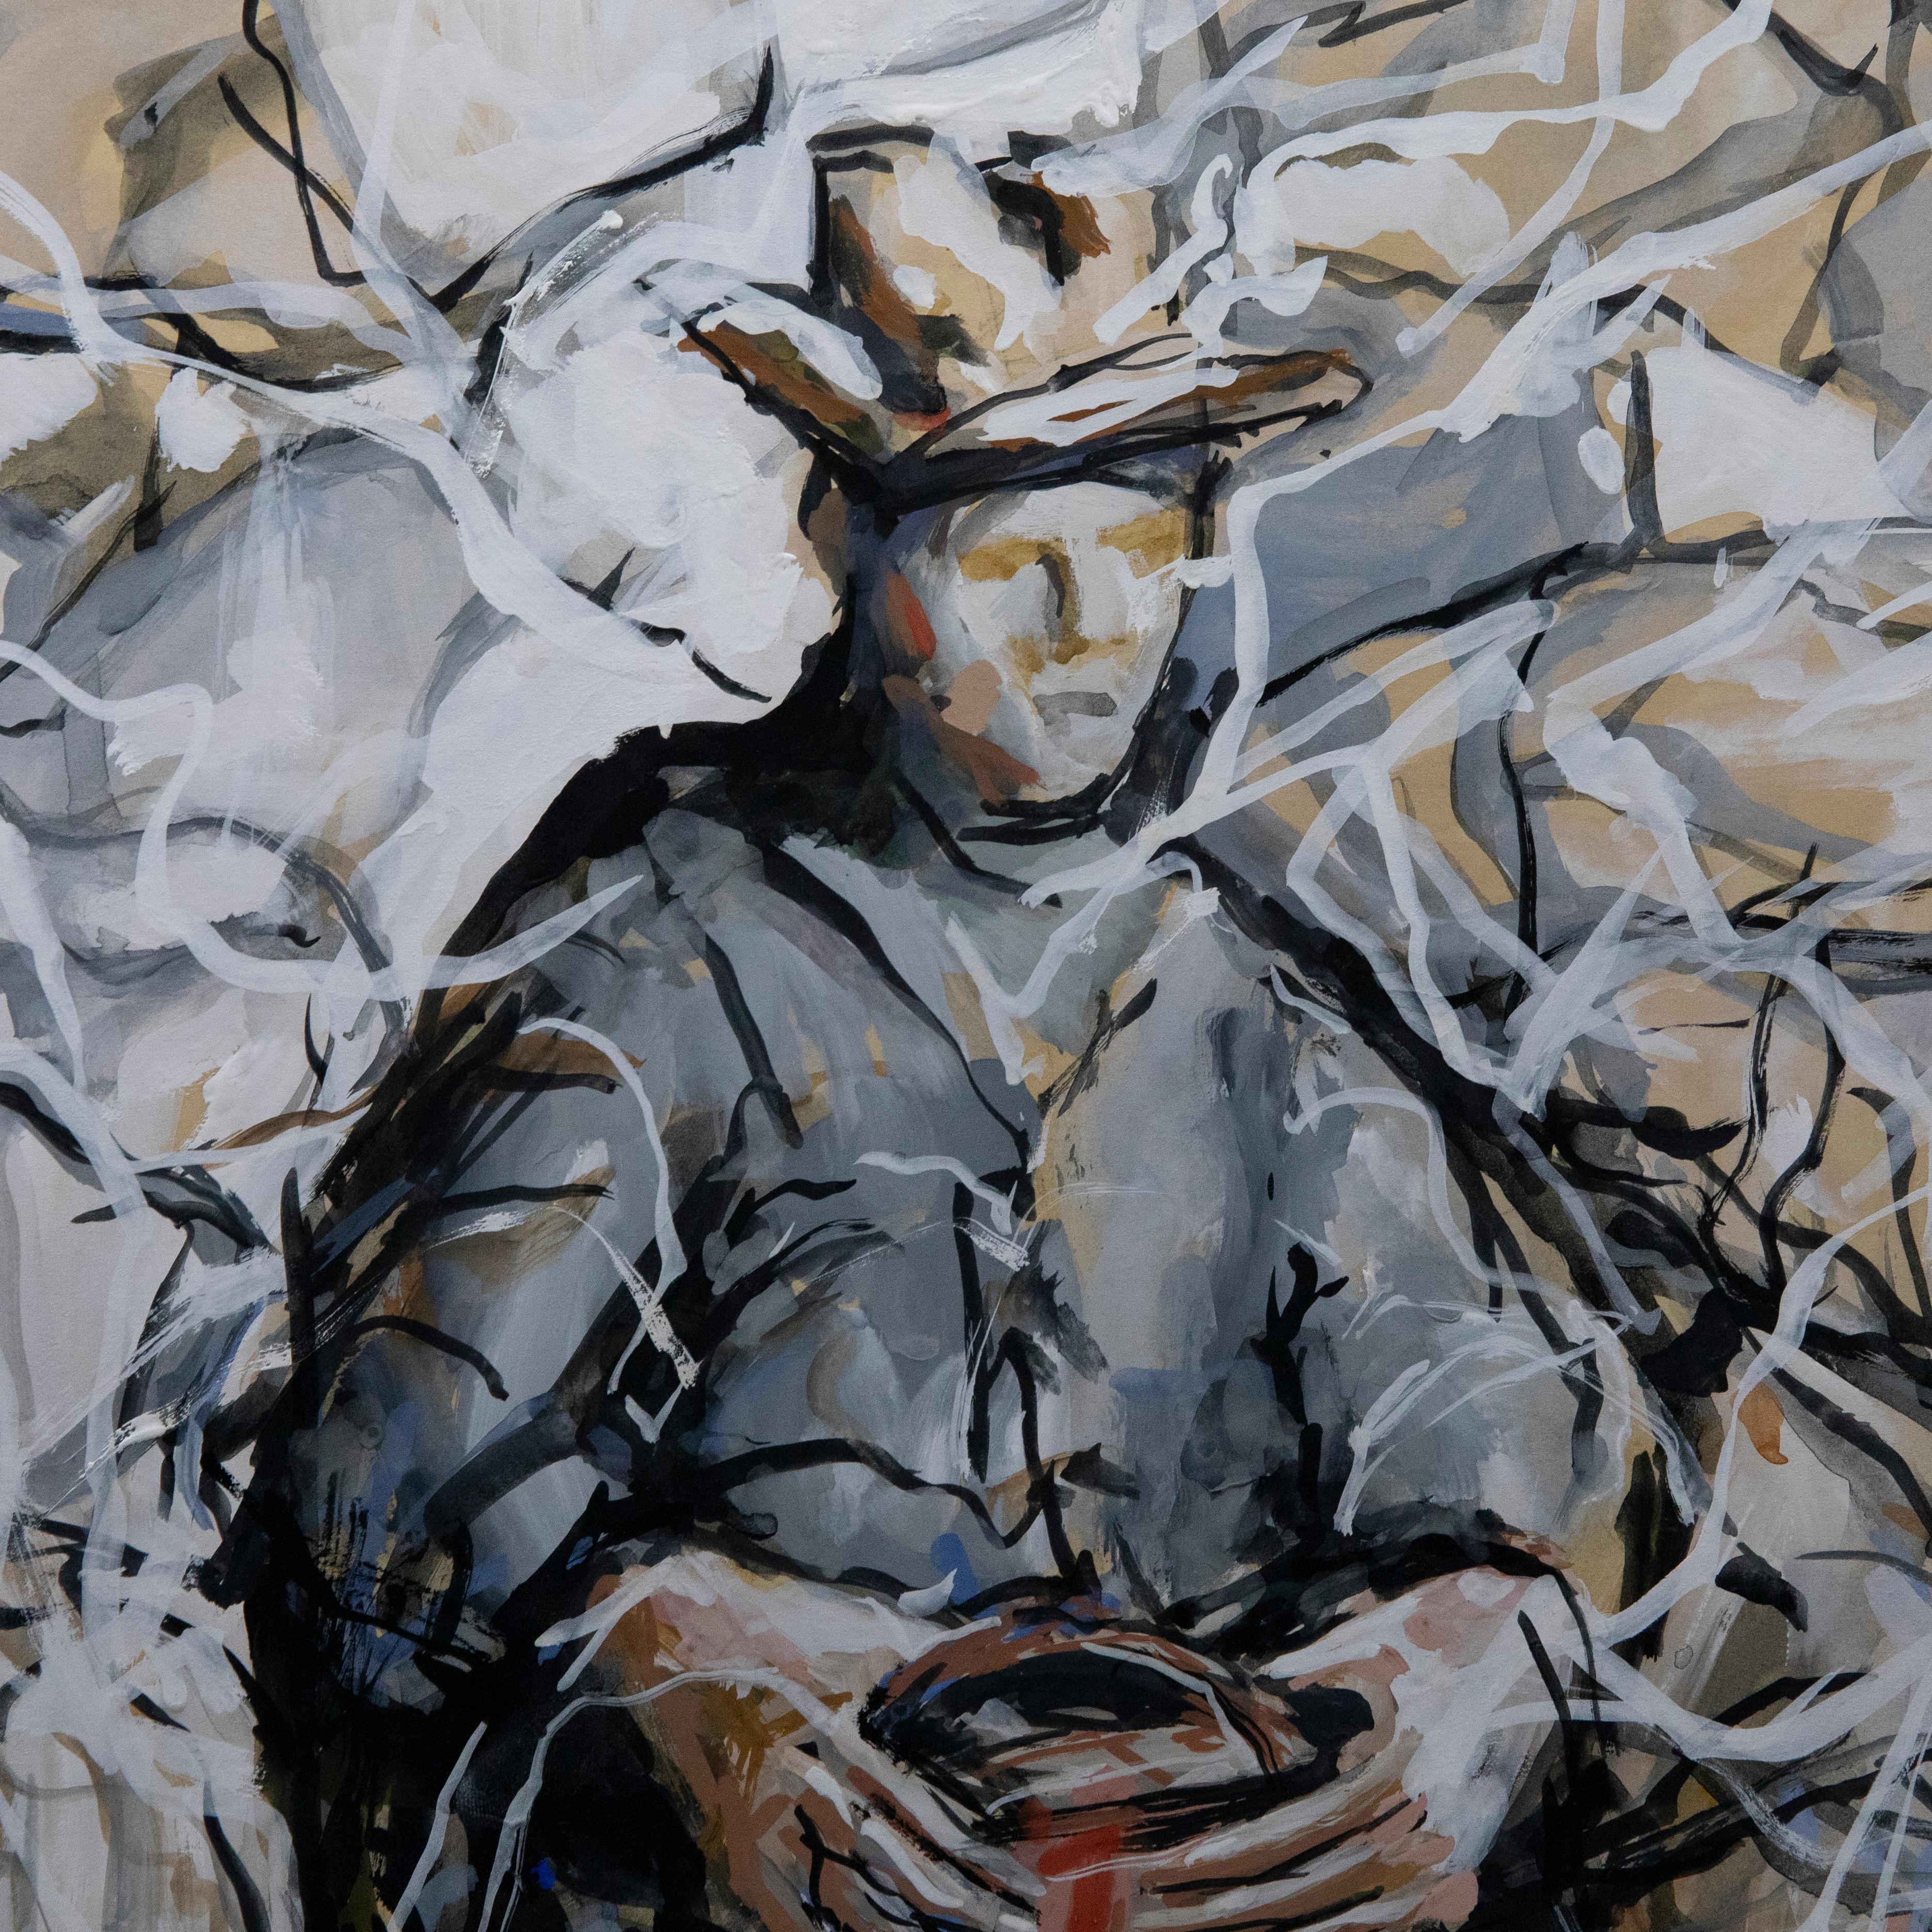 An expressive gouache study depicting a man in a wheelchair clutching a box in his lap. The man is encased by winding tree branches that wind through the composition. The artist uses loose, gestural brushwork to capture the man and his surroundings,